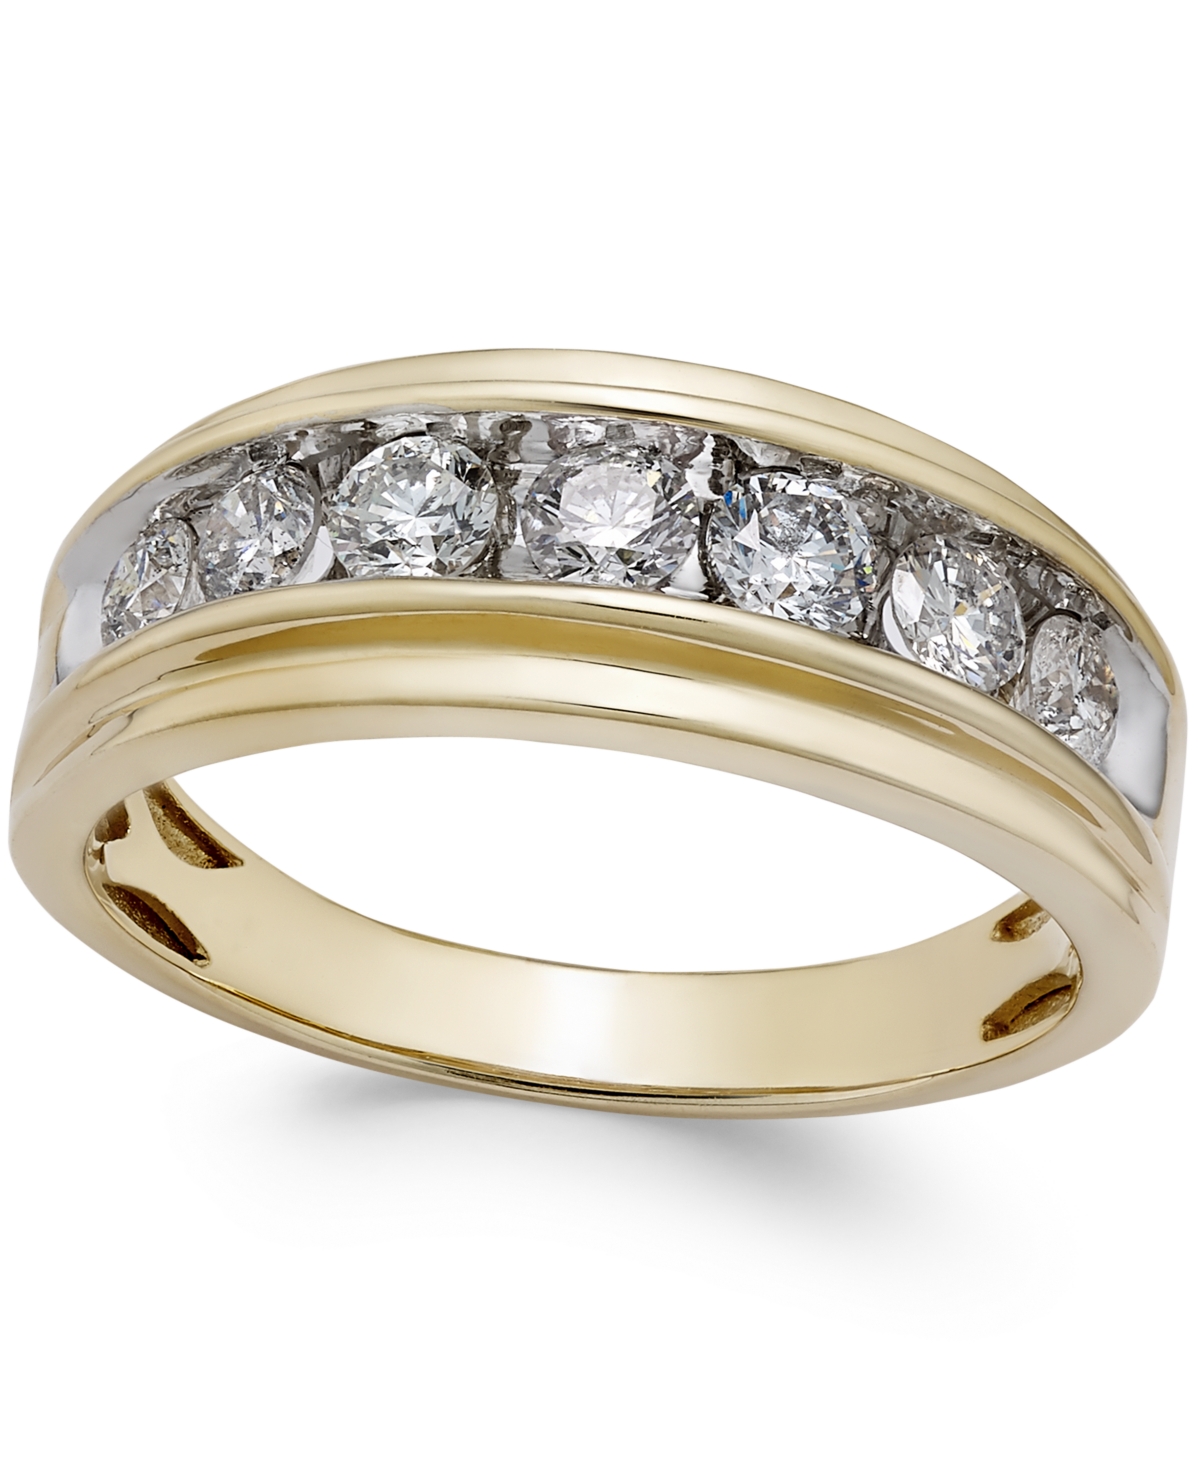 Men's Diamond Band (1 ct. t.w.) in 10k Gold - Yellow Gold